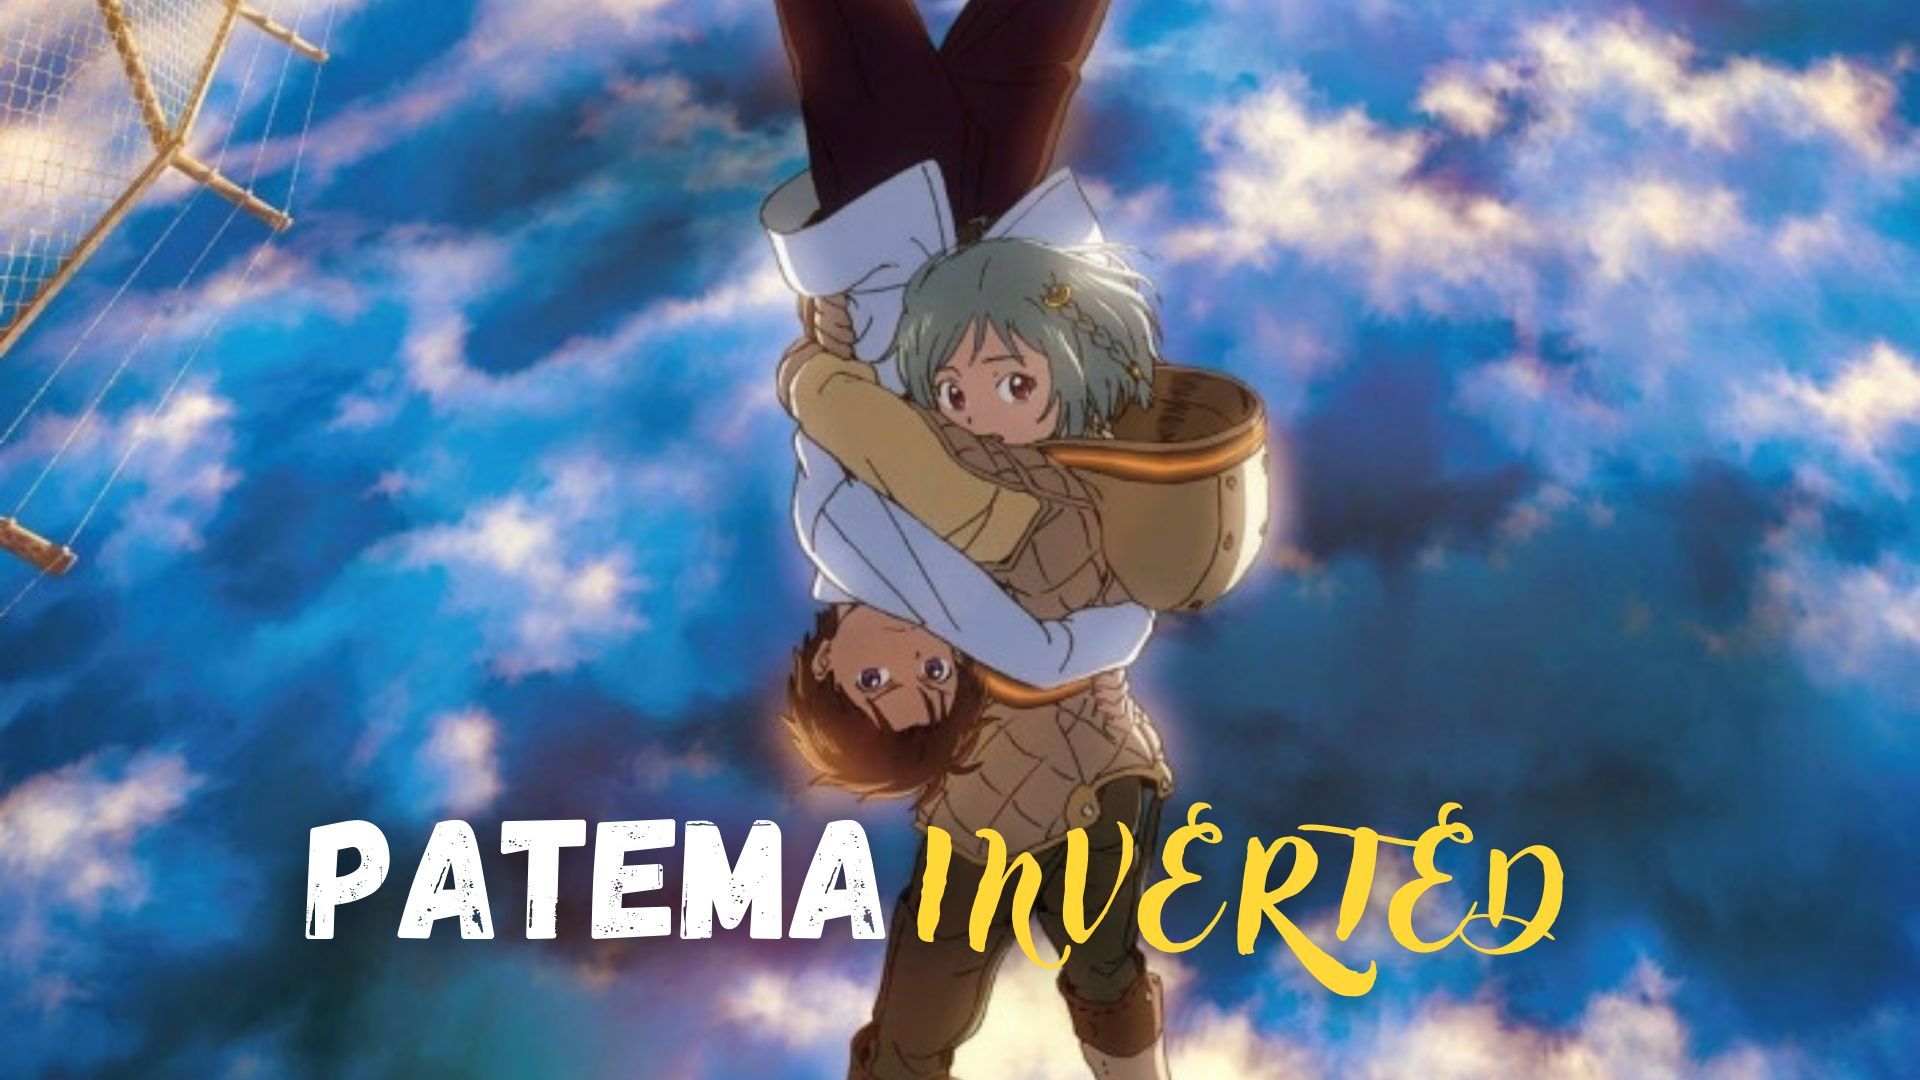 Patema Inverted Thoughts/Review